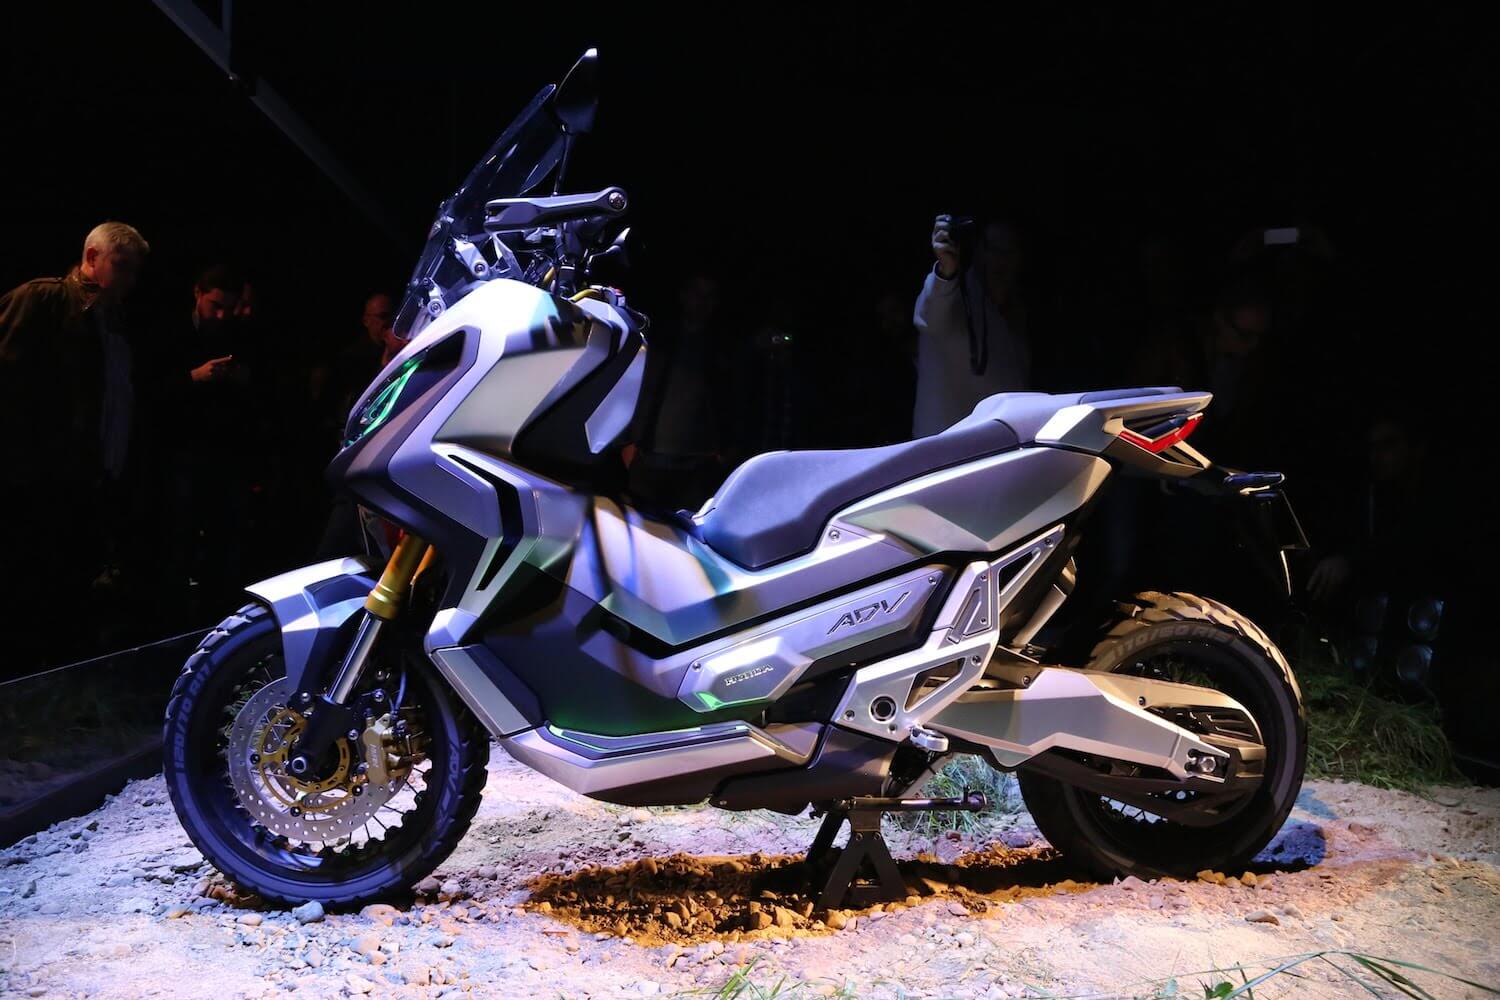 Honda X ADV Scooter Motorcycle Hybrid Confirmed For 2017